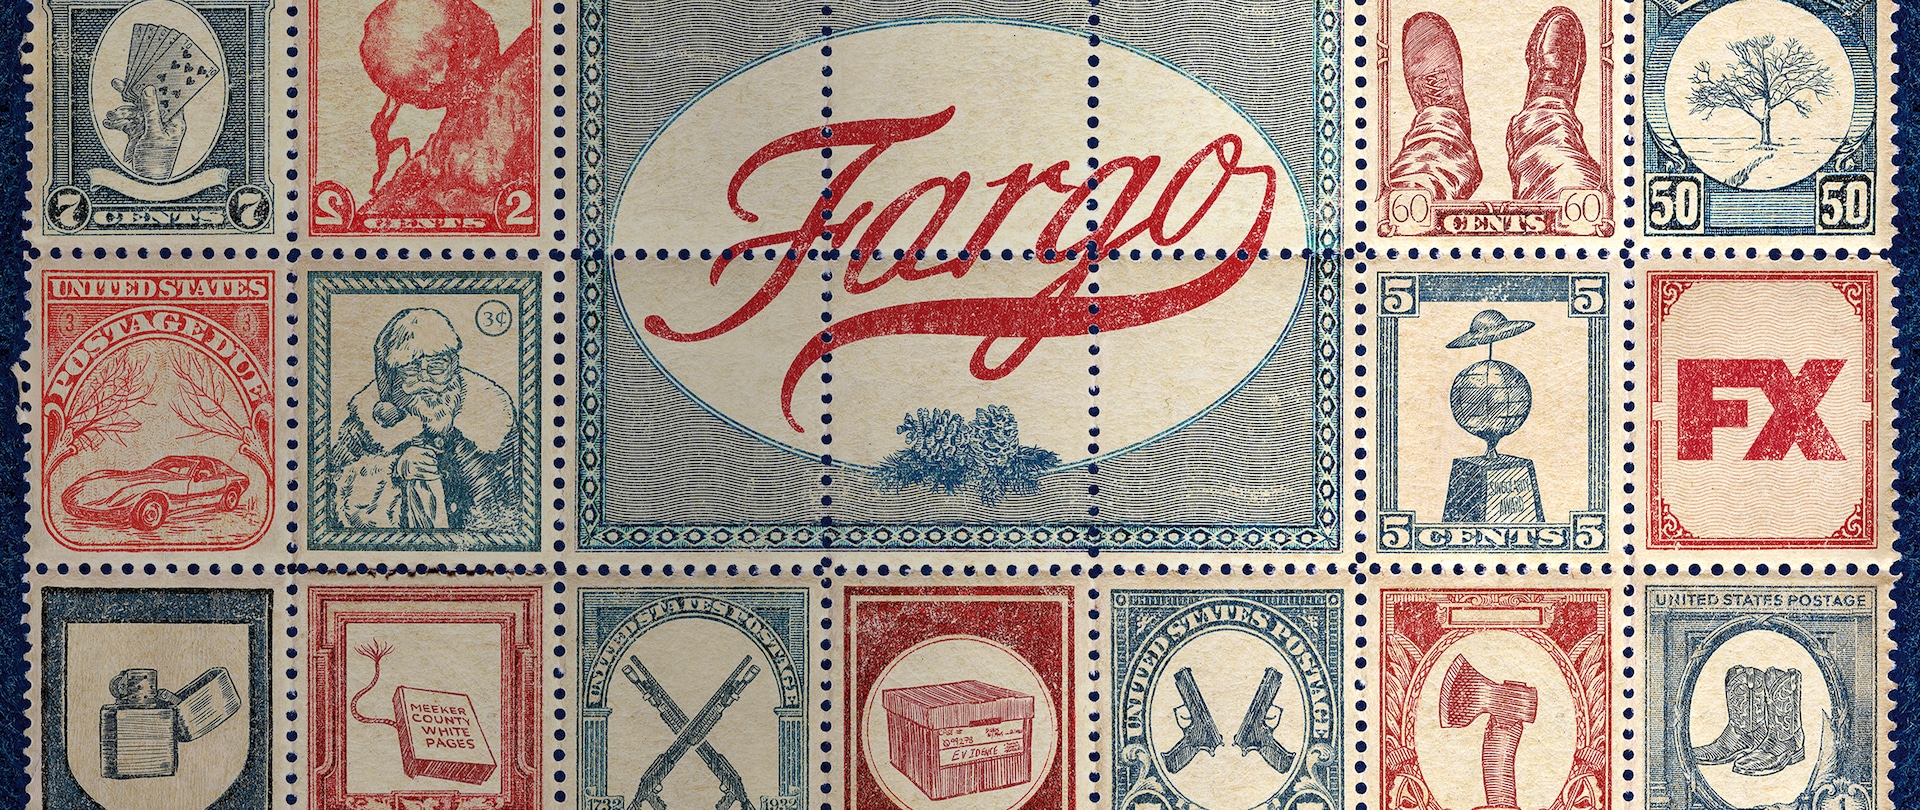 Various blue and red vintage stamps of shoes, guns, and random items with a large blue stamp with Fargo in red at the center